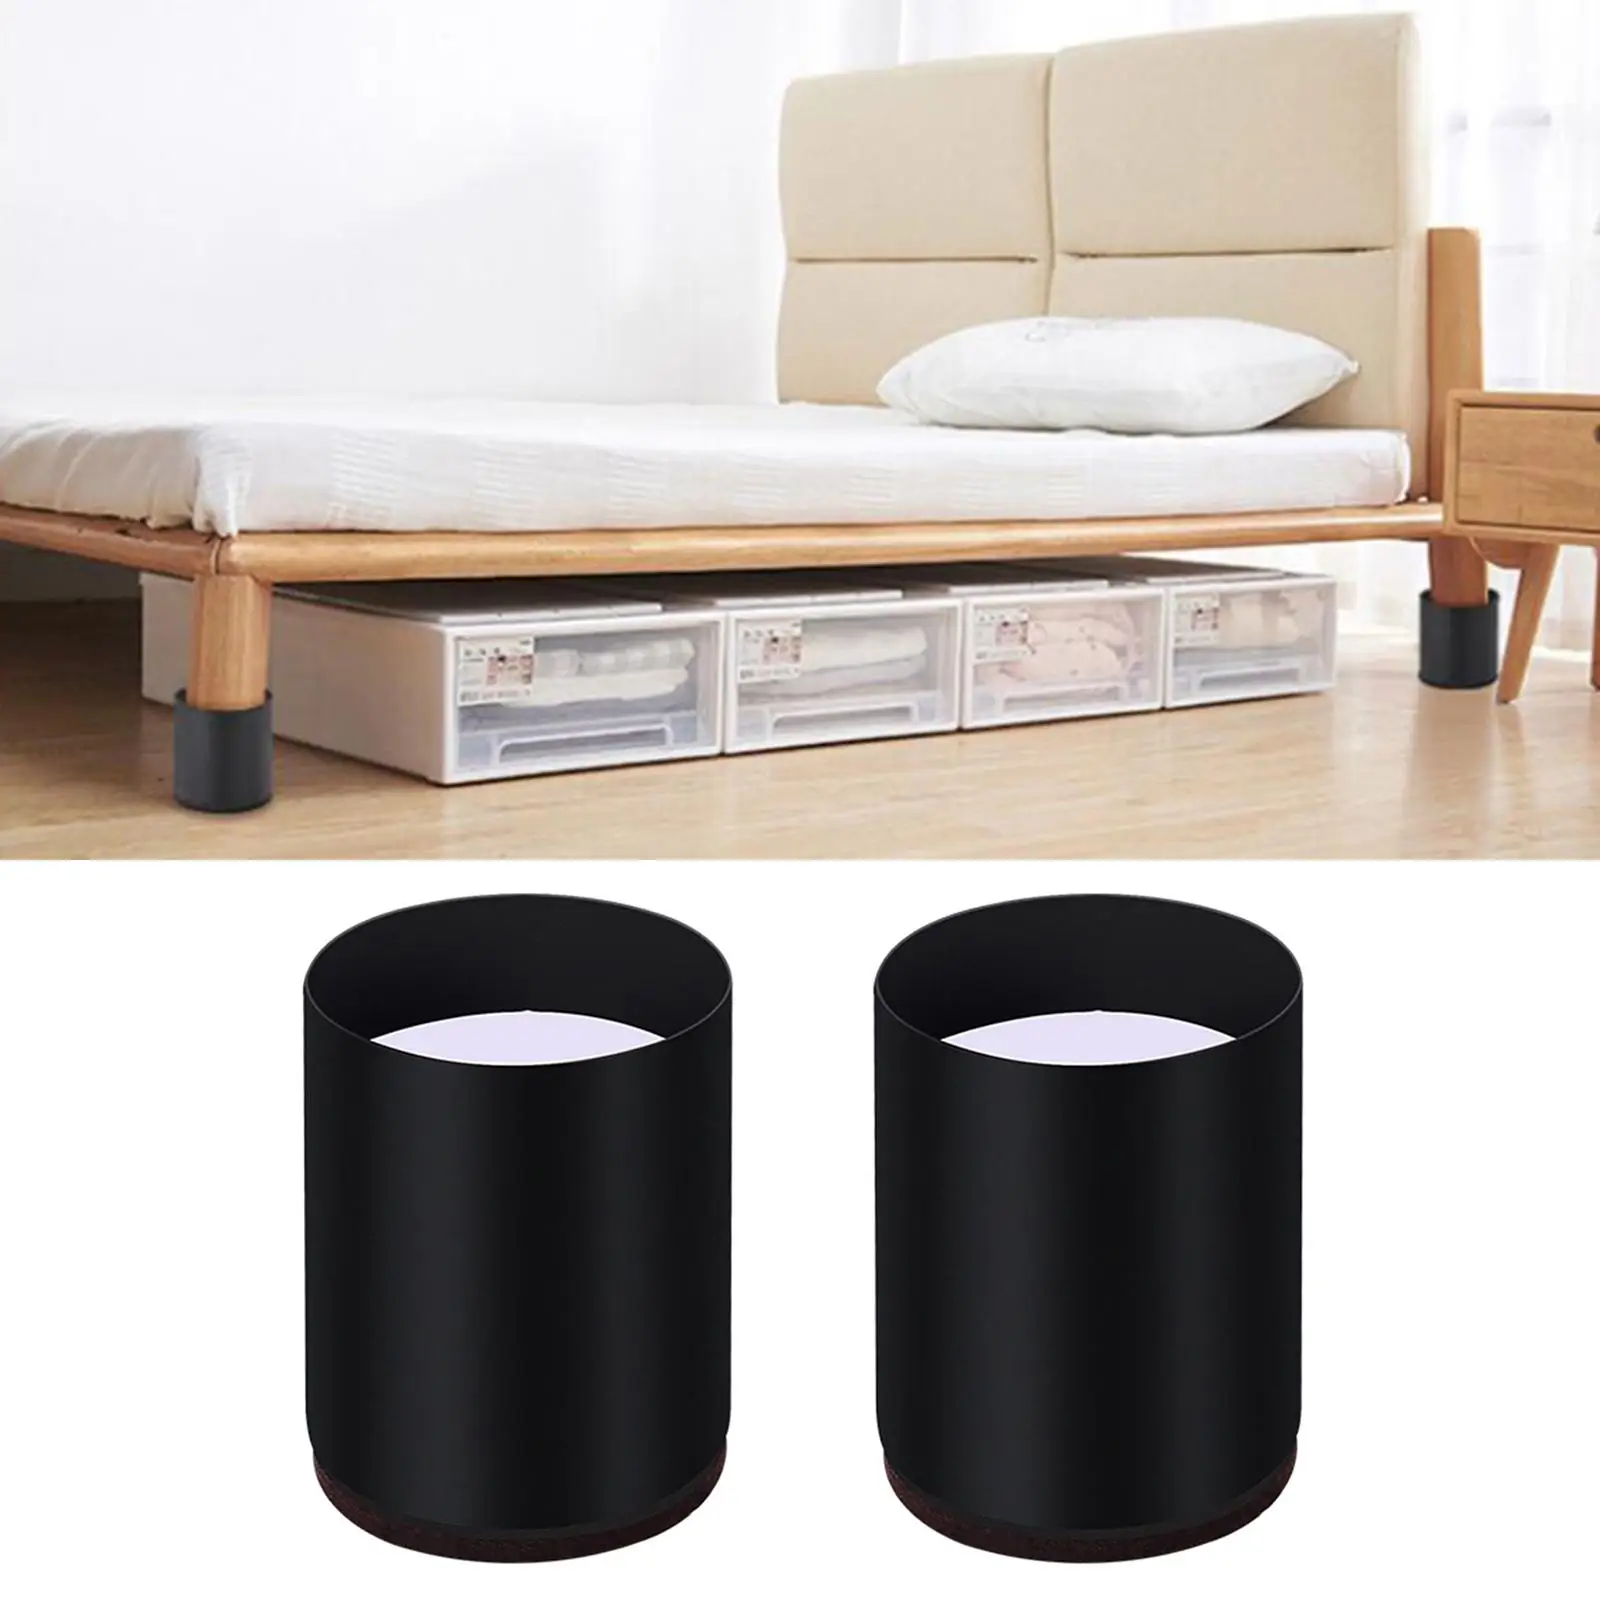 Bed and Furniture Risers Chair Riser Lifter Sofa Legs Riser Home Foot Accessories for Beds, Sofa, Table